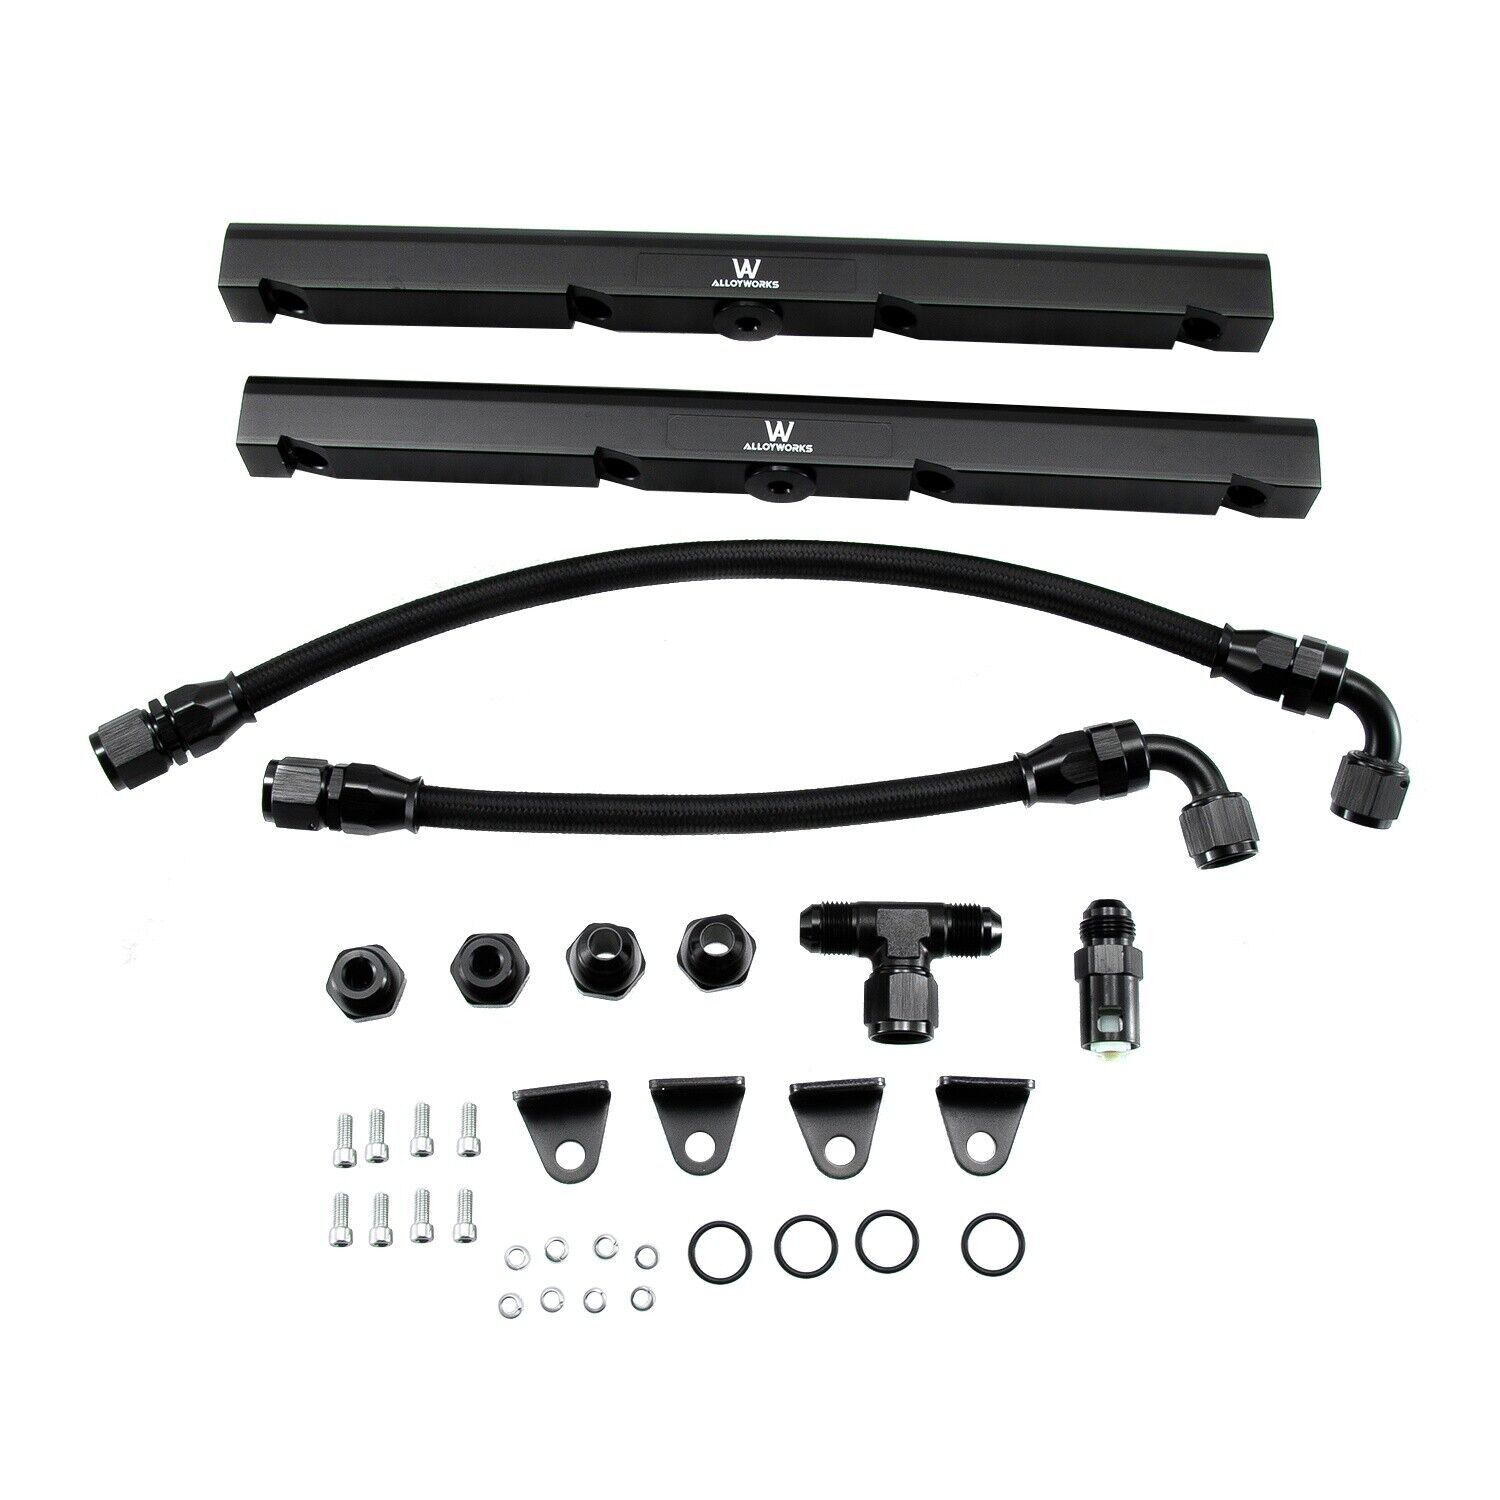 New Black Fuel Rails w/ Fittings & Crossover Hose Fits LS1/ LS6 -8AN High Flow